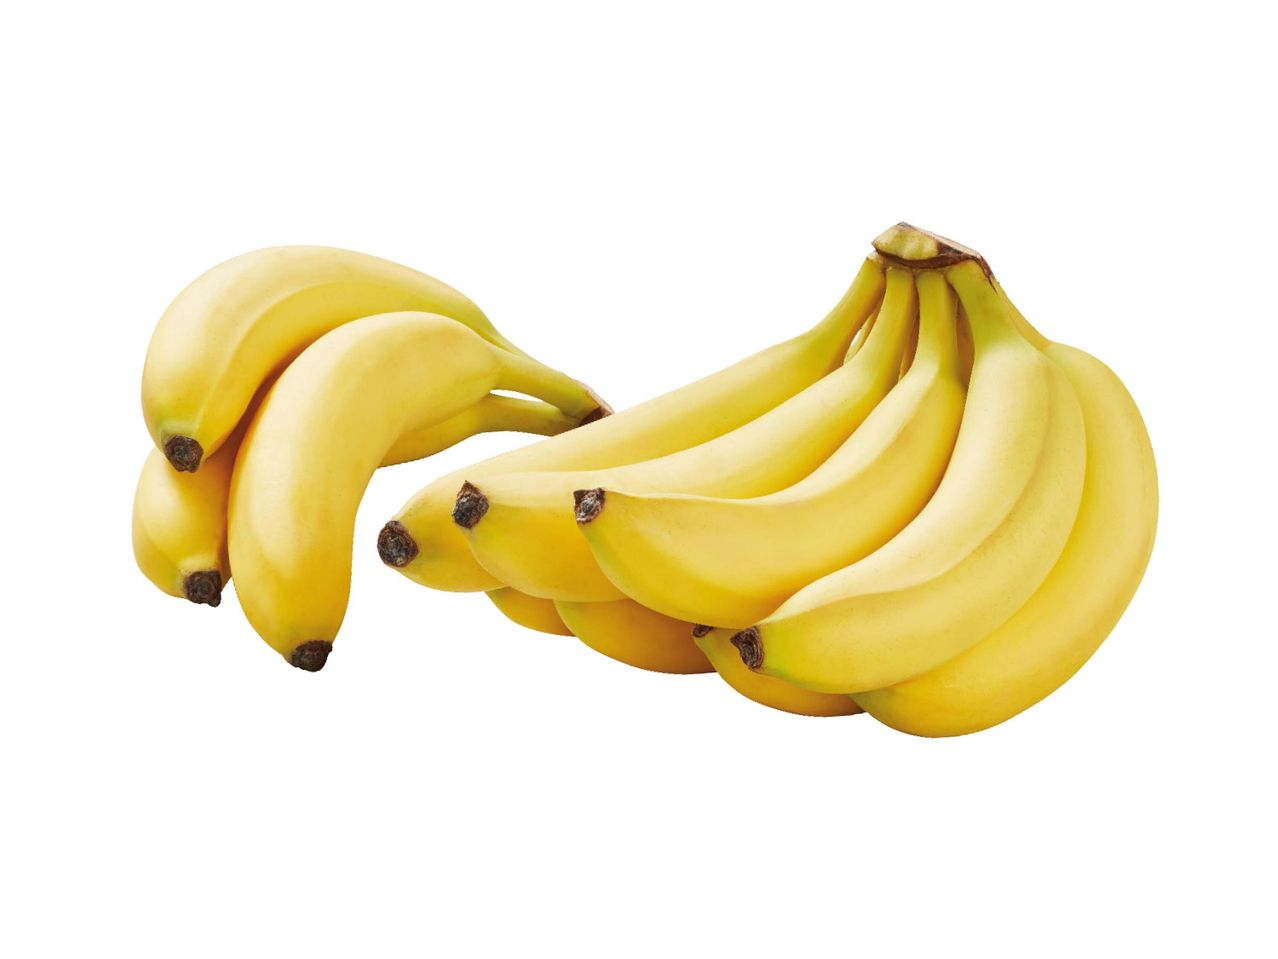 Go to full screen view: Bananas - Image 1